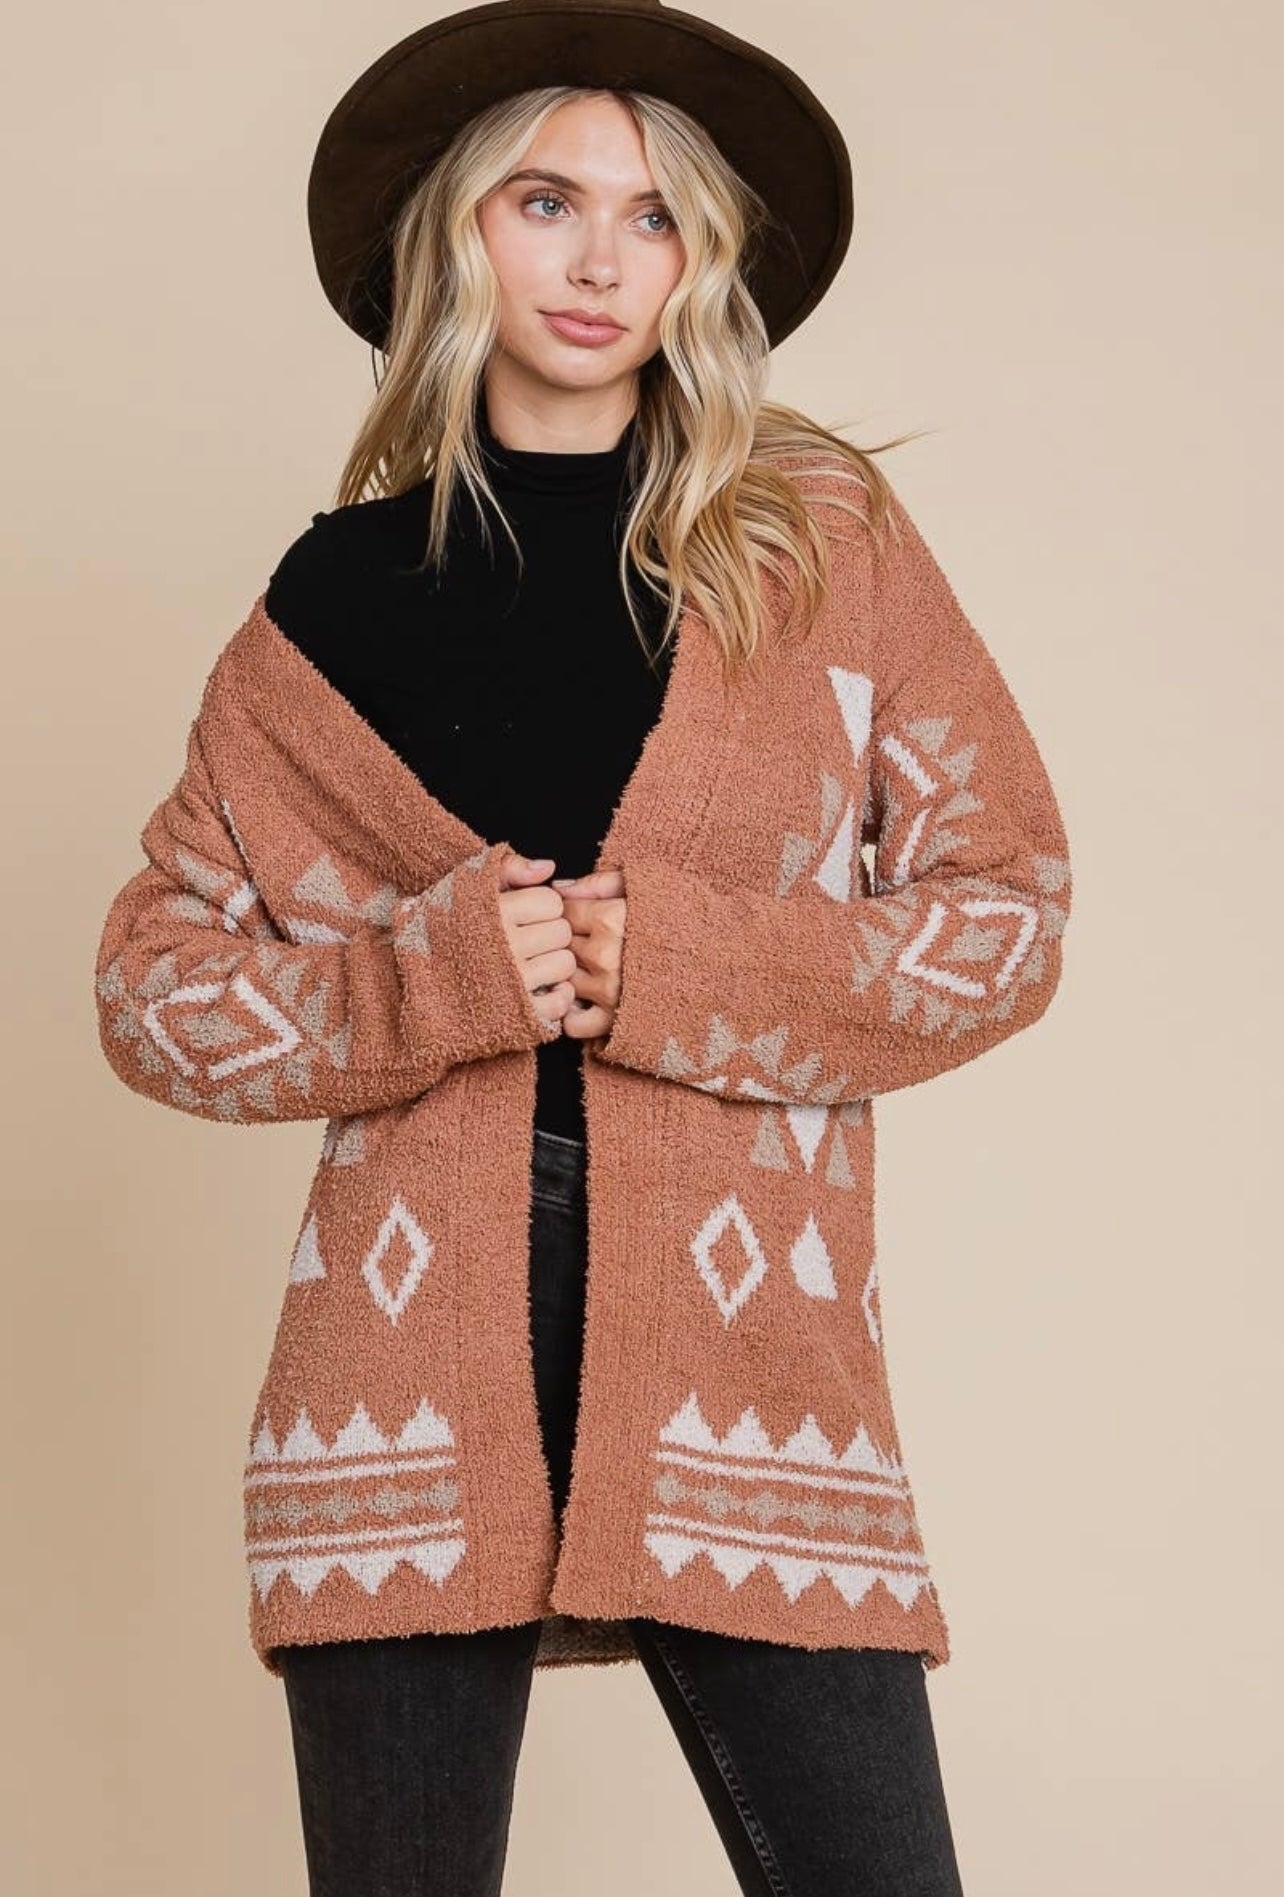 Tribal Print Knit Open Front Cardigan In Camel